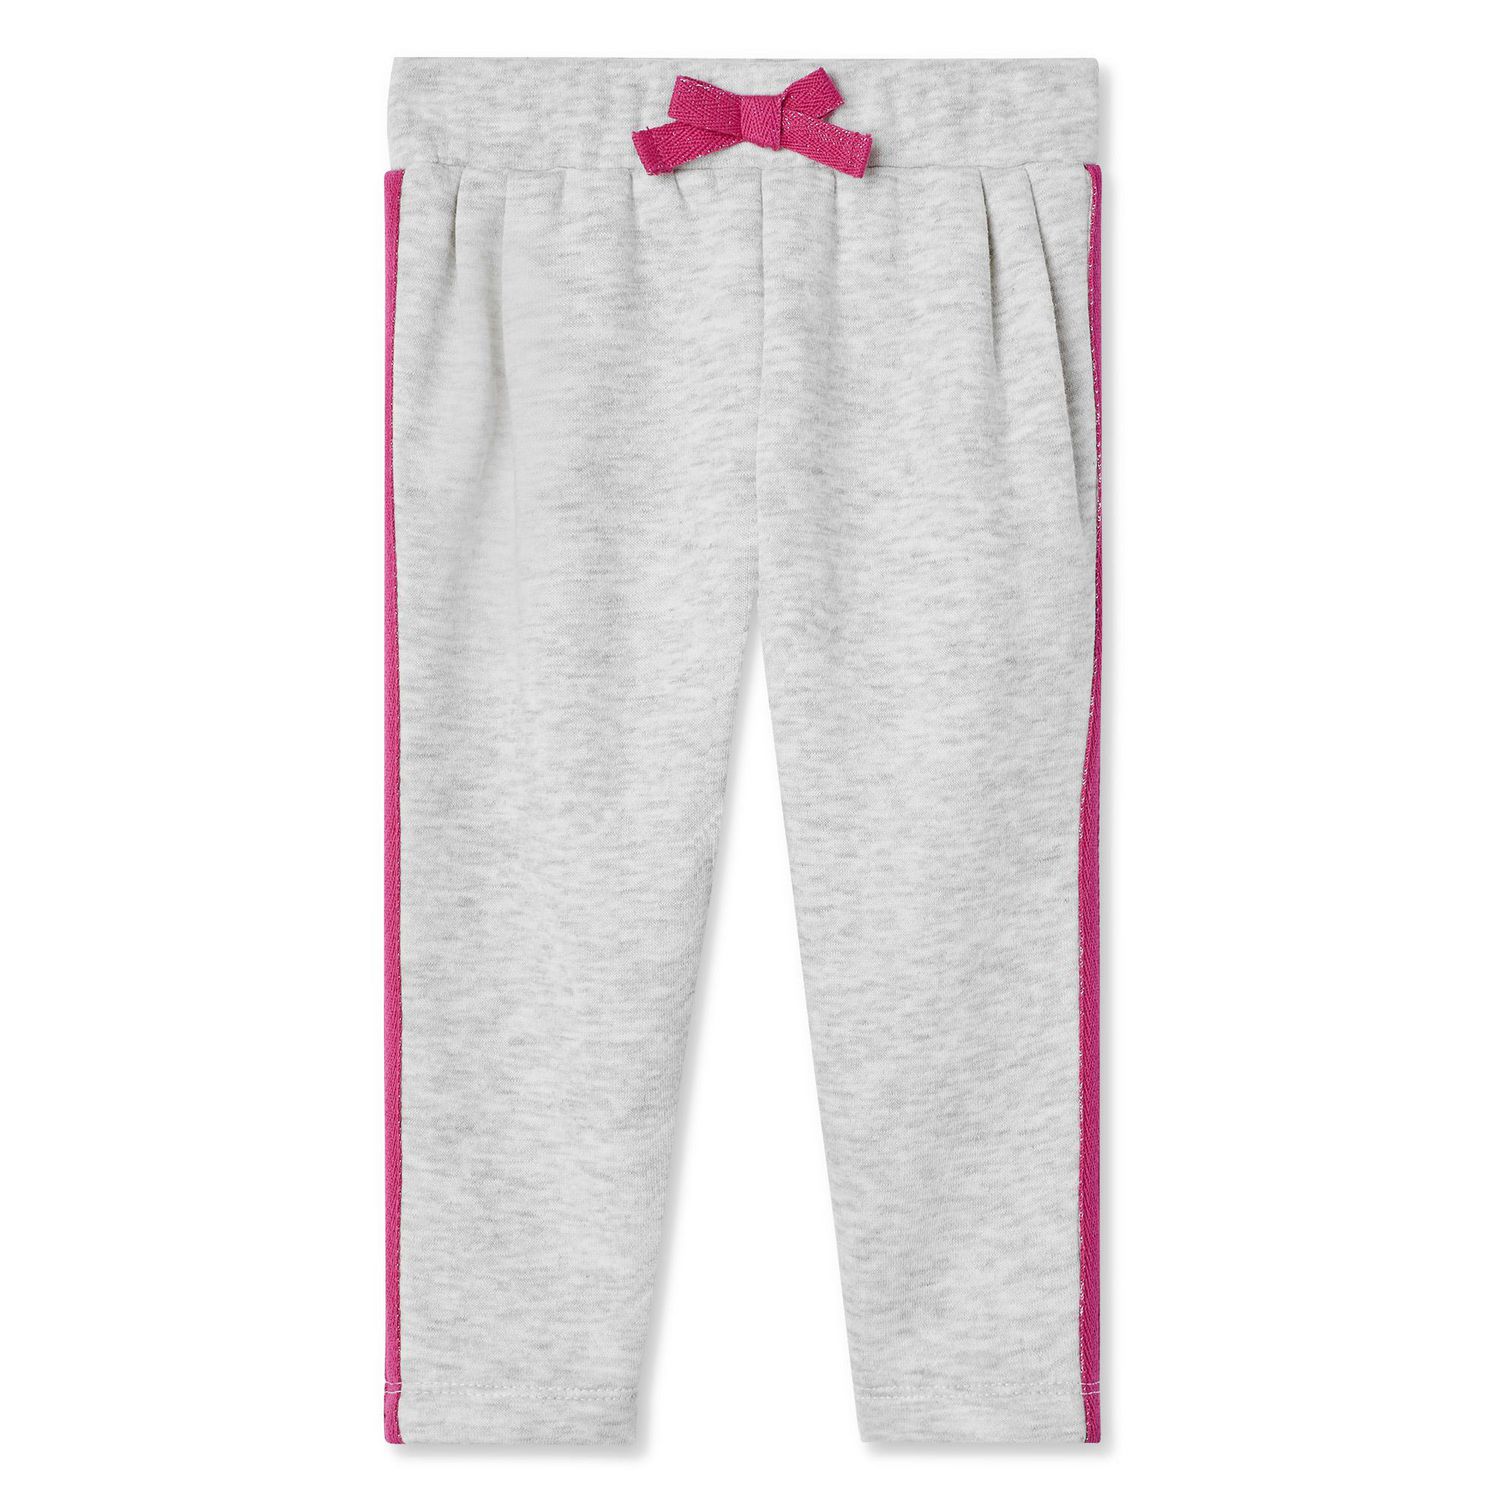 George Baby Girls' Taped Joggers | Walmart Canada